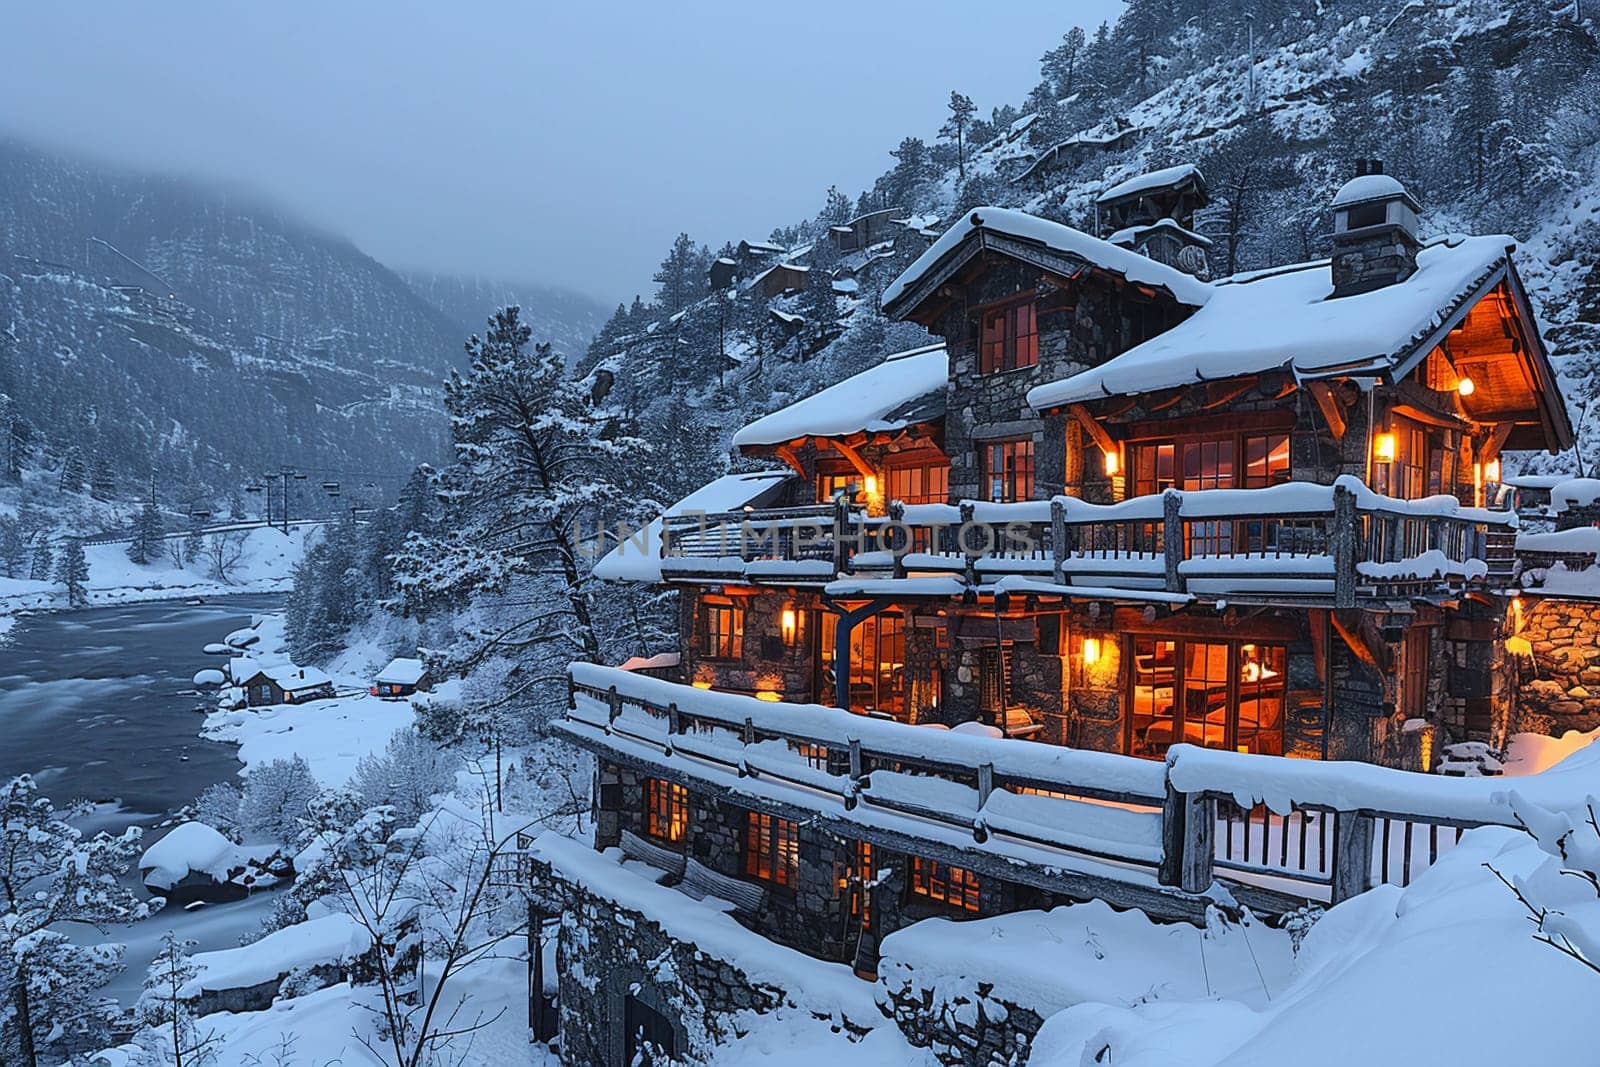 Remote Ski Lodge with Cozy Fireplaces and Snow-Covered Roofs by Benzoix